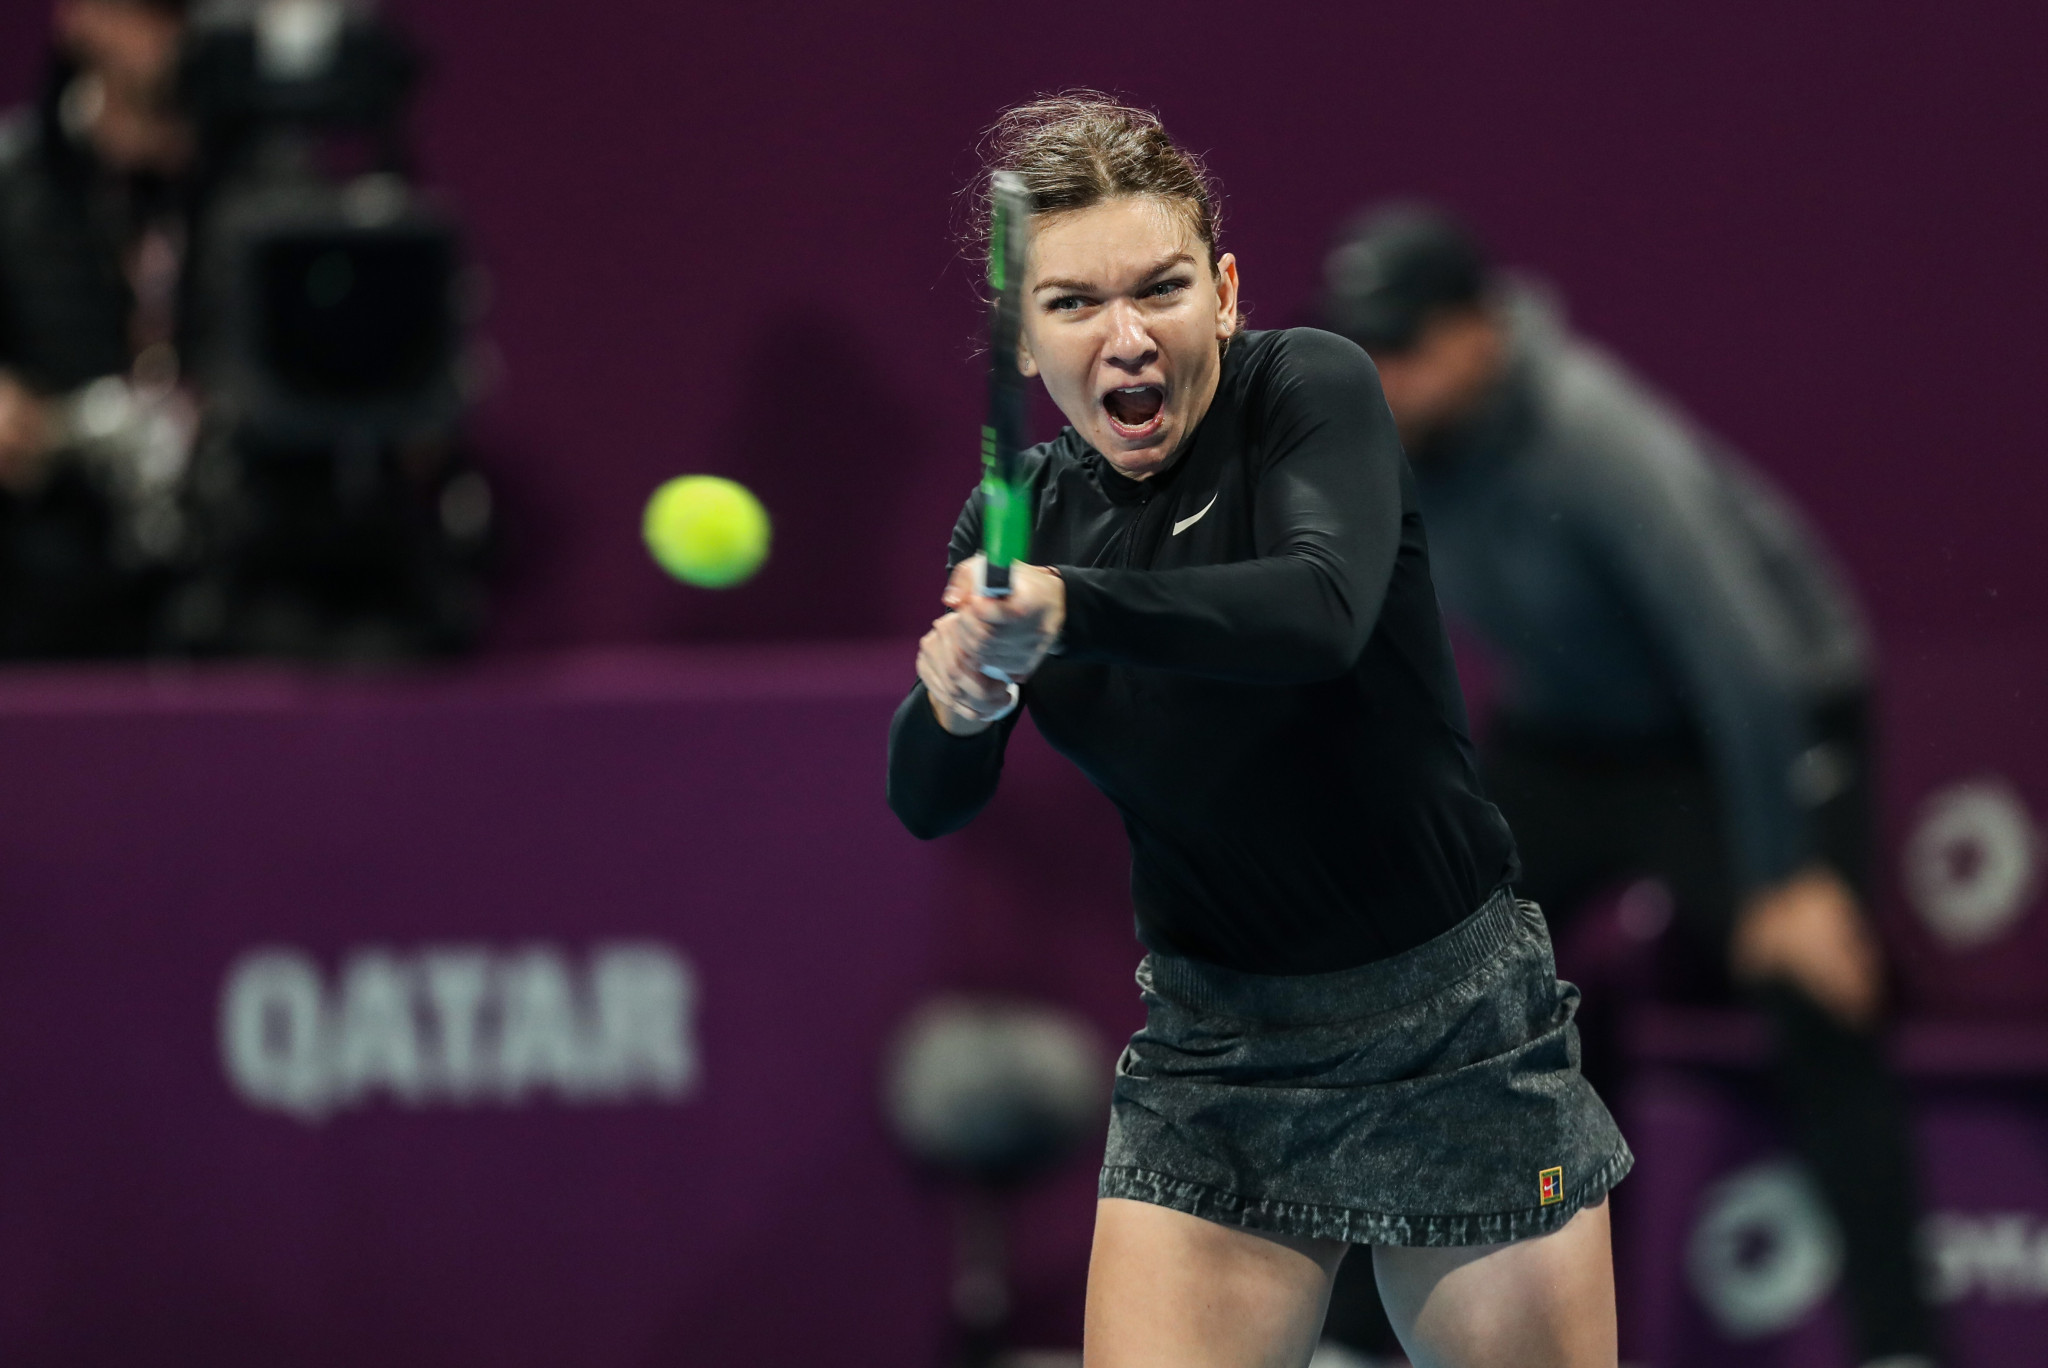 Top seed Halep sets up clash against Svitolina following quarter-final victory at WTA Qatar Open